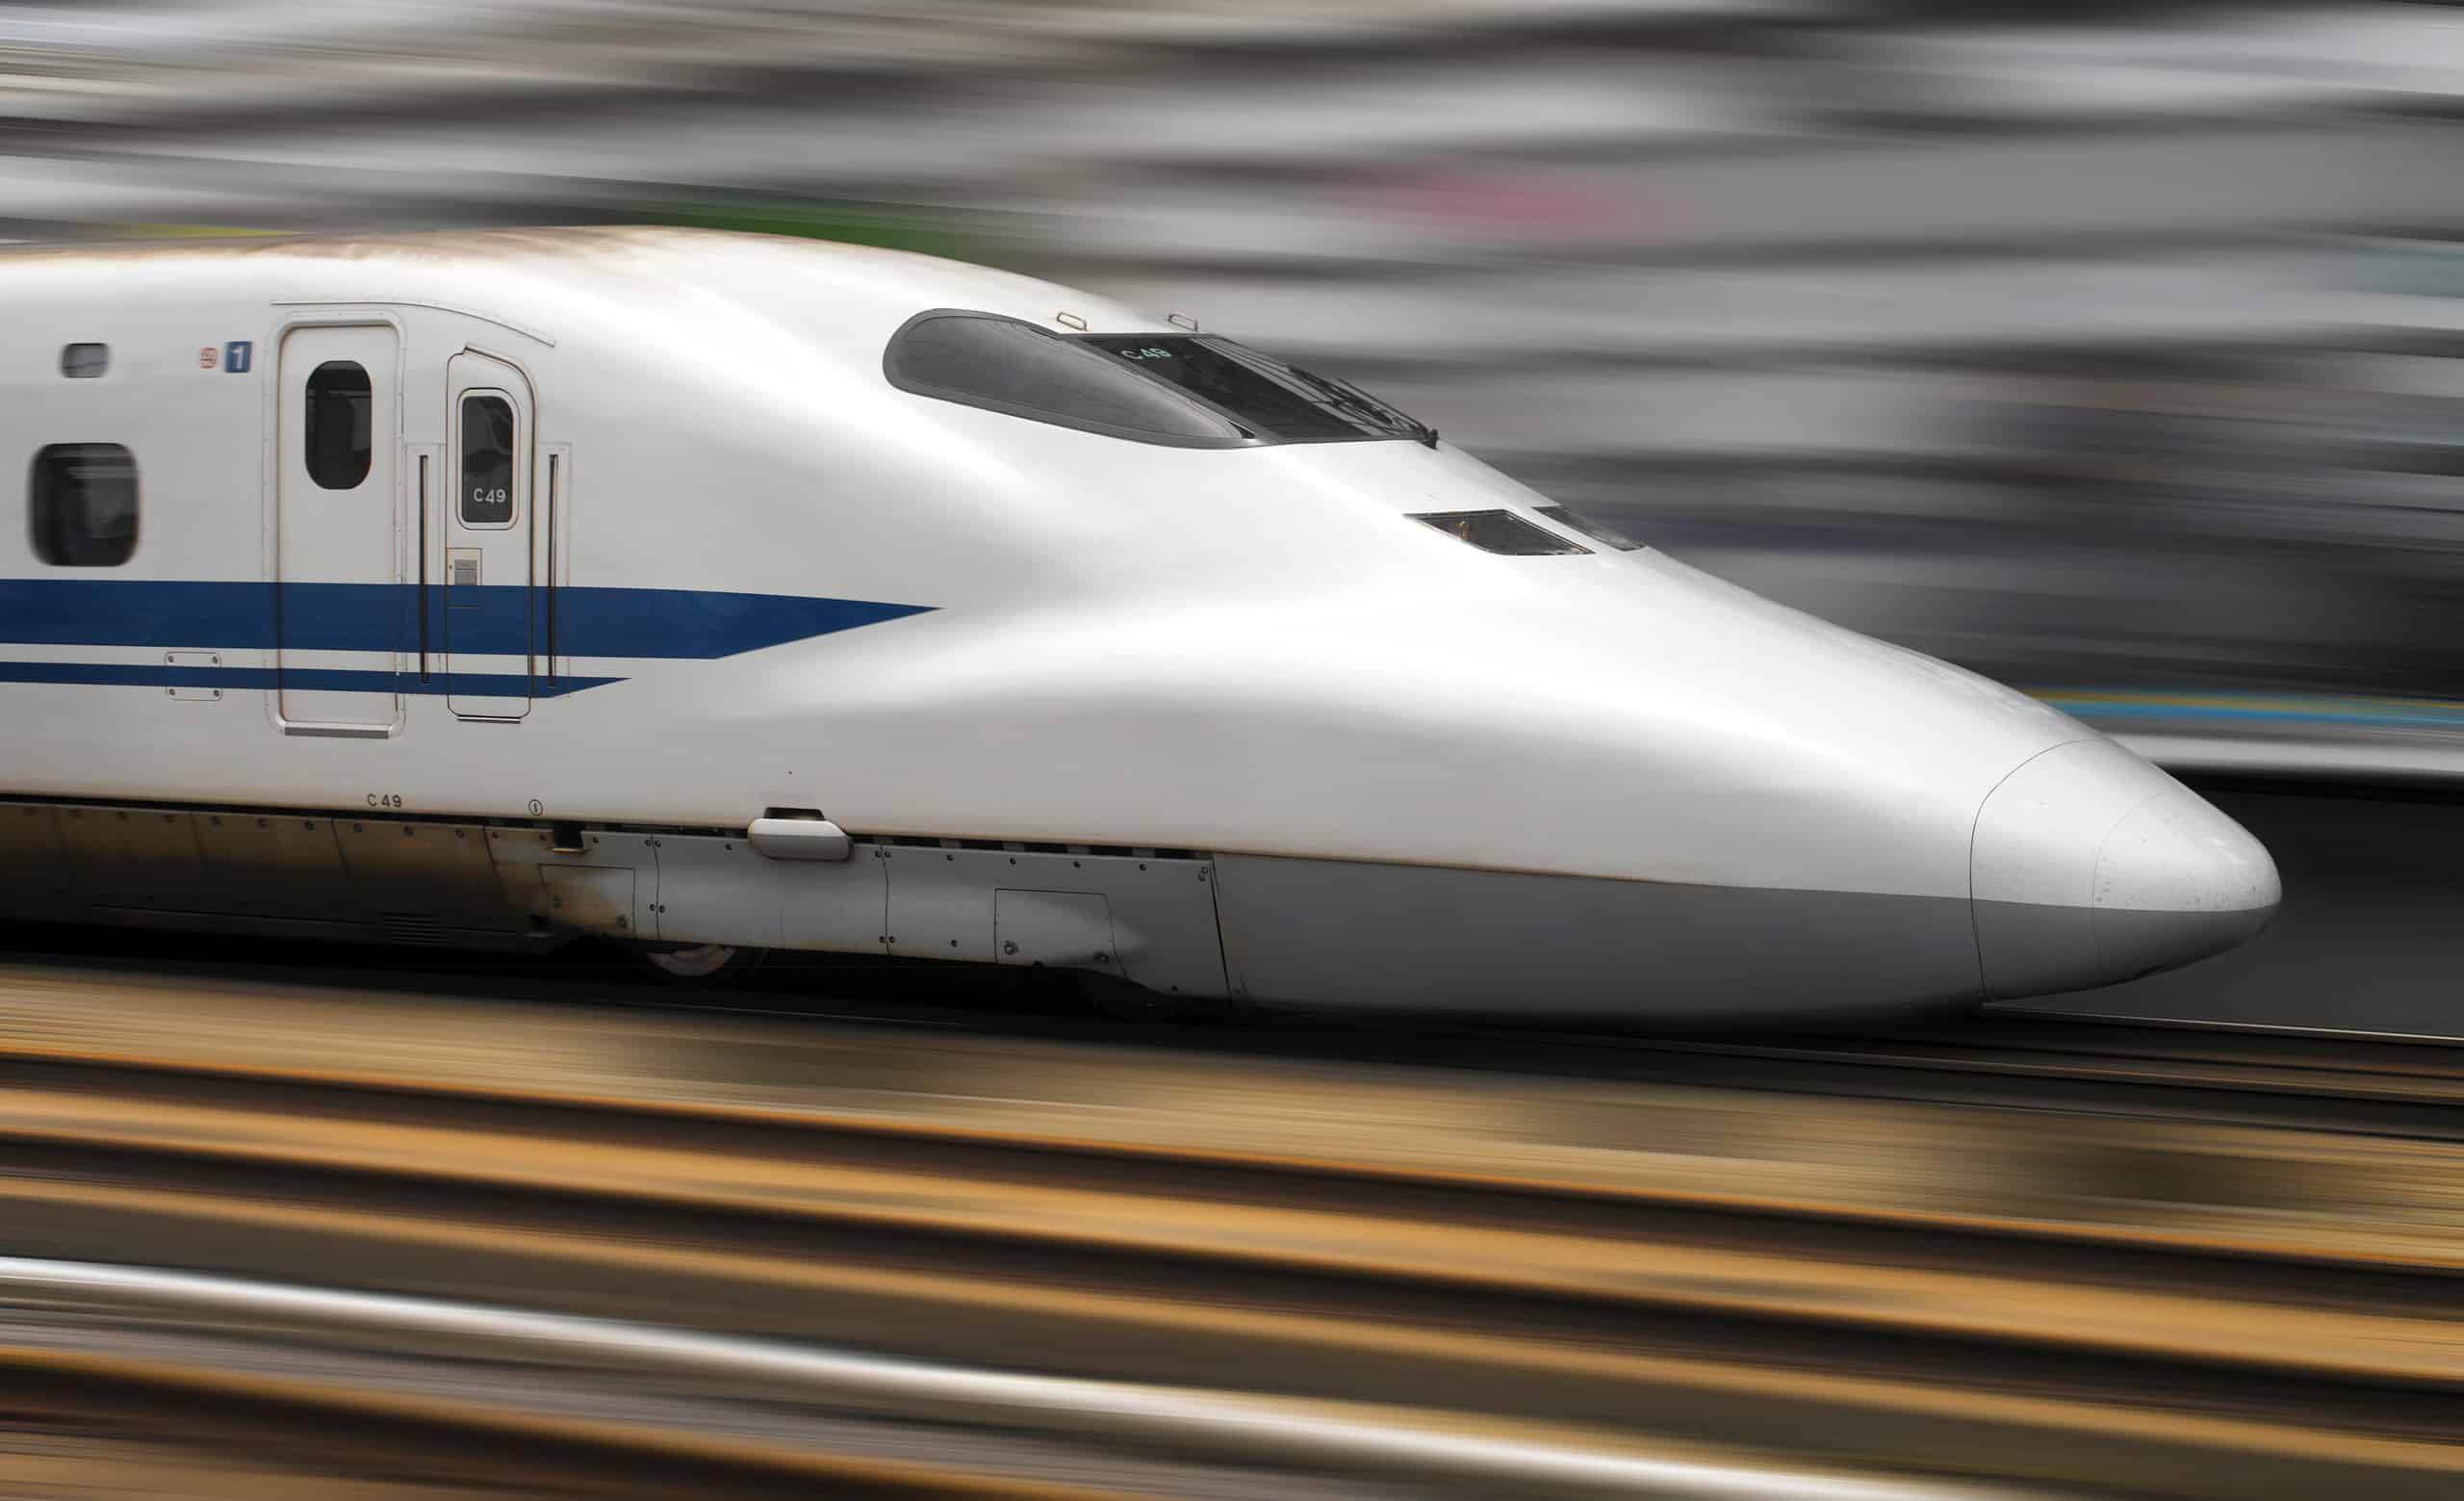 <p>The Japanese consistently remain at the forefront of rail transport. The prime example is the <a href="https://www.jrailpass.com/shinkansen-bullet-trains" rel="noopener">Shinkansen</a>, commonly known as the bullet train. The bullet train is so legendary that <a href="https://www.sonypictures.com/movies/bullettrain" rel="noopener">a film</a> was named after it, served as most of the backdrop, and the thriller starred Brad Pitt. Introduced in 1964, the Shinkansen continues to evolve in design, comfort, and efficiency. Newer models like the N700S feature sleek aerodynamic designs and advanced suspension systems for smooth rides. Today, this rail transportation is a cross-country network powered by renewable electricity. The fastest bullet train in the country can reach speeds of 200 mph.</p>    <p>The Japanese will continue to evolve its train industry, leveraging groundbreaking technology as soon as it arises.</p><p>Sharks, lions, alligators, and more! Don’t miss today’s latest and most exciting animal news. <strong><a href="https://www.msn.com/en-us/channel/source/AZ%20Animals%20US/sr-vid-7etr9q8xun6k6508c3nufaum0de3dqktiq6h27ddeagnfug30wka">Click here to access the A-Z Animals profile page</a> and be sure to hit the <em>Follow</em> button here or at the top of this article!</strong></p> <p>Have feedback? Add a comment below!</p>